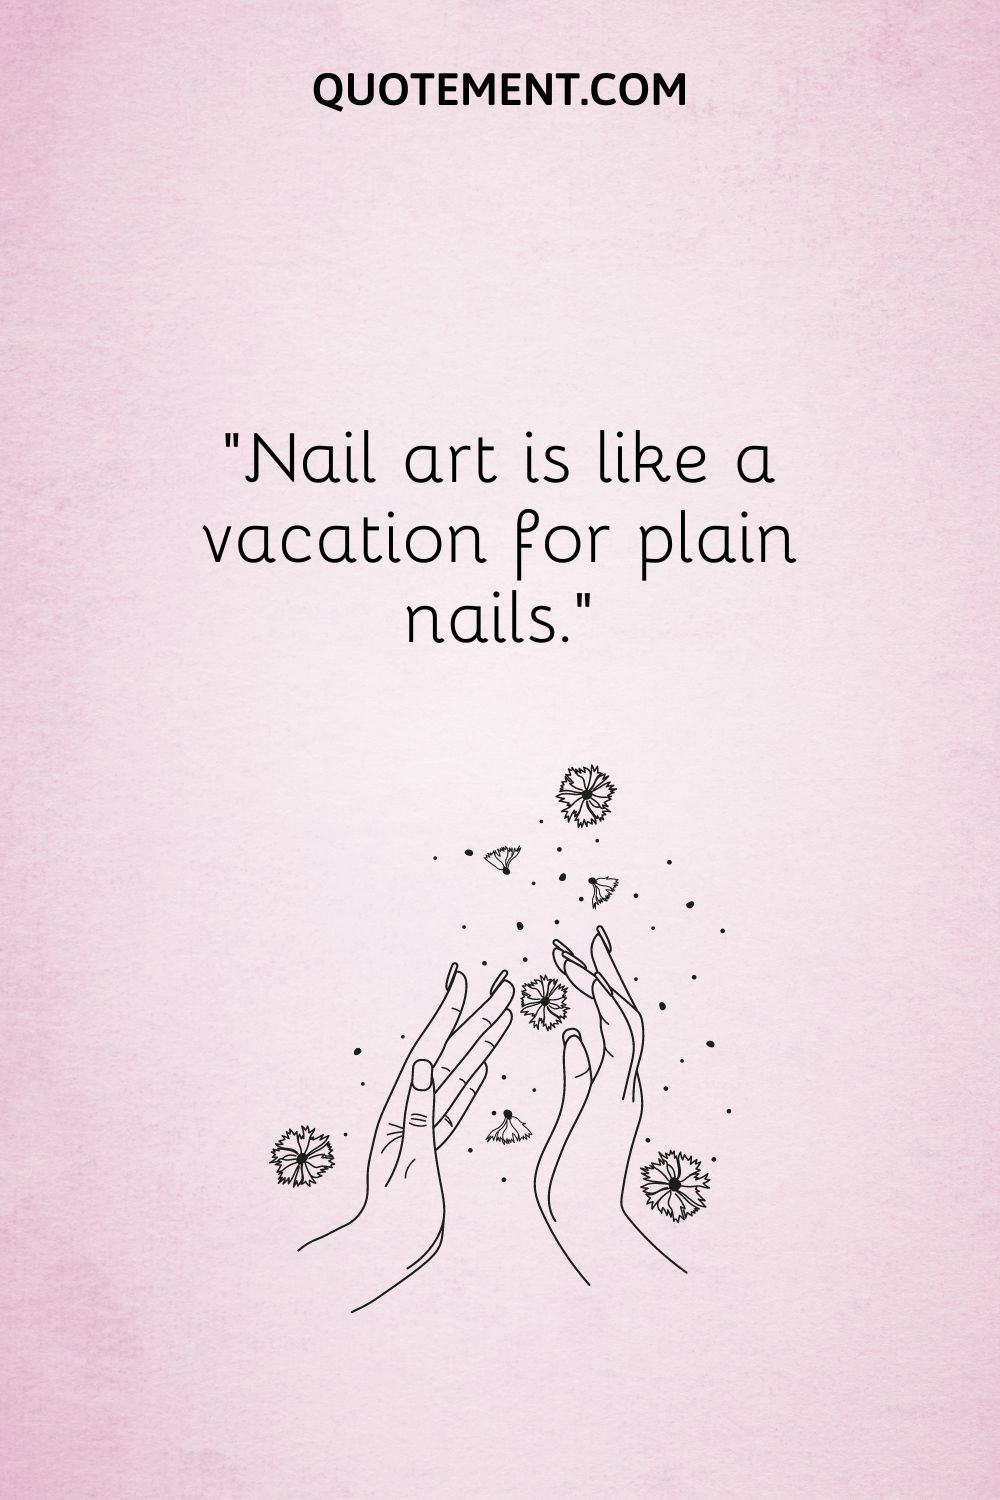 Nail art is like a vacation for plain nails.